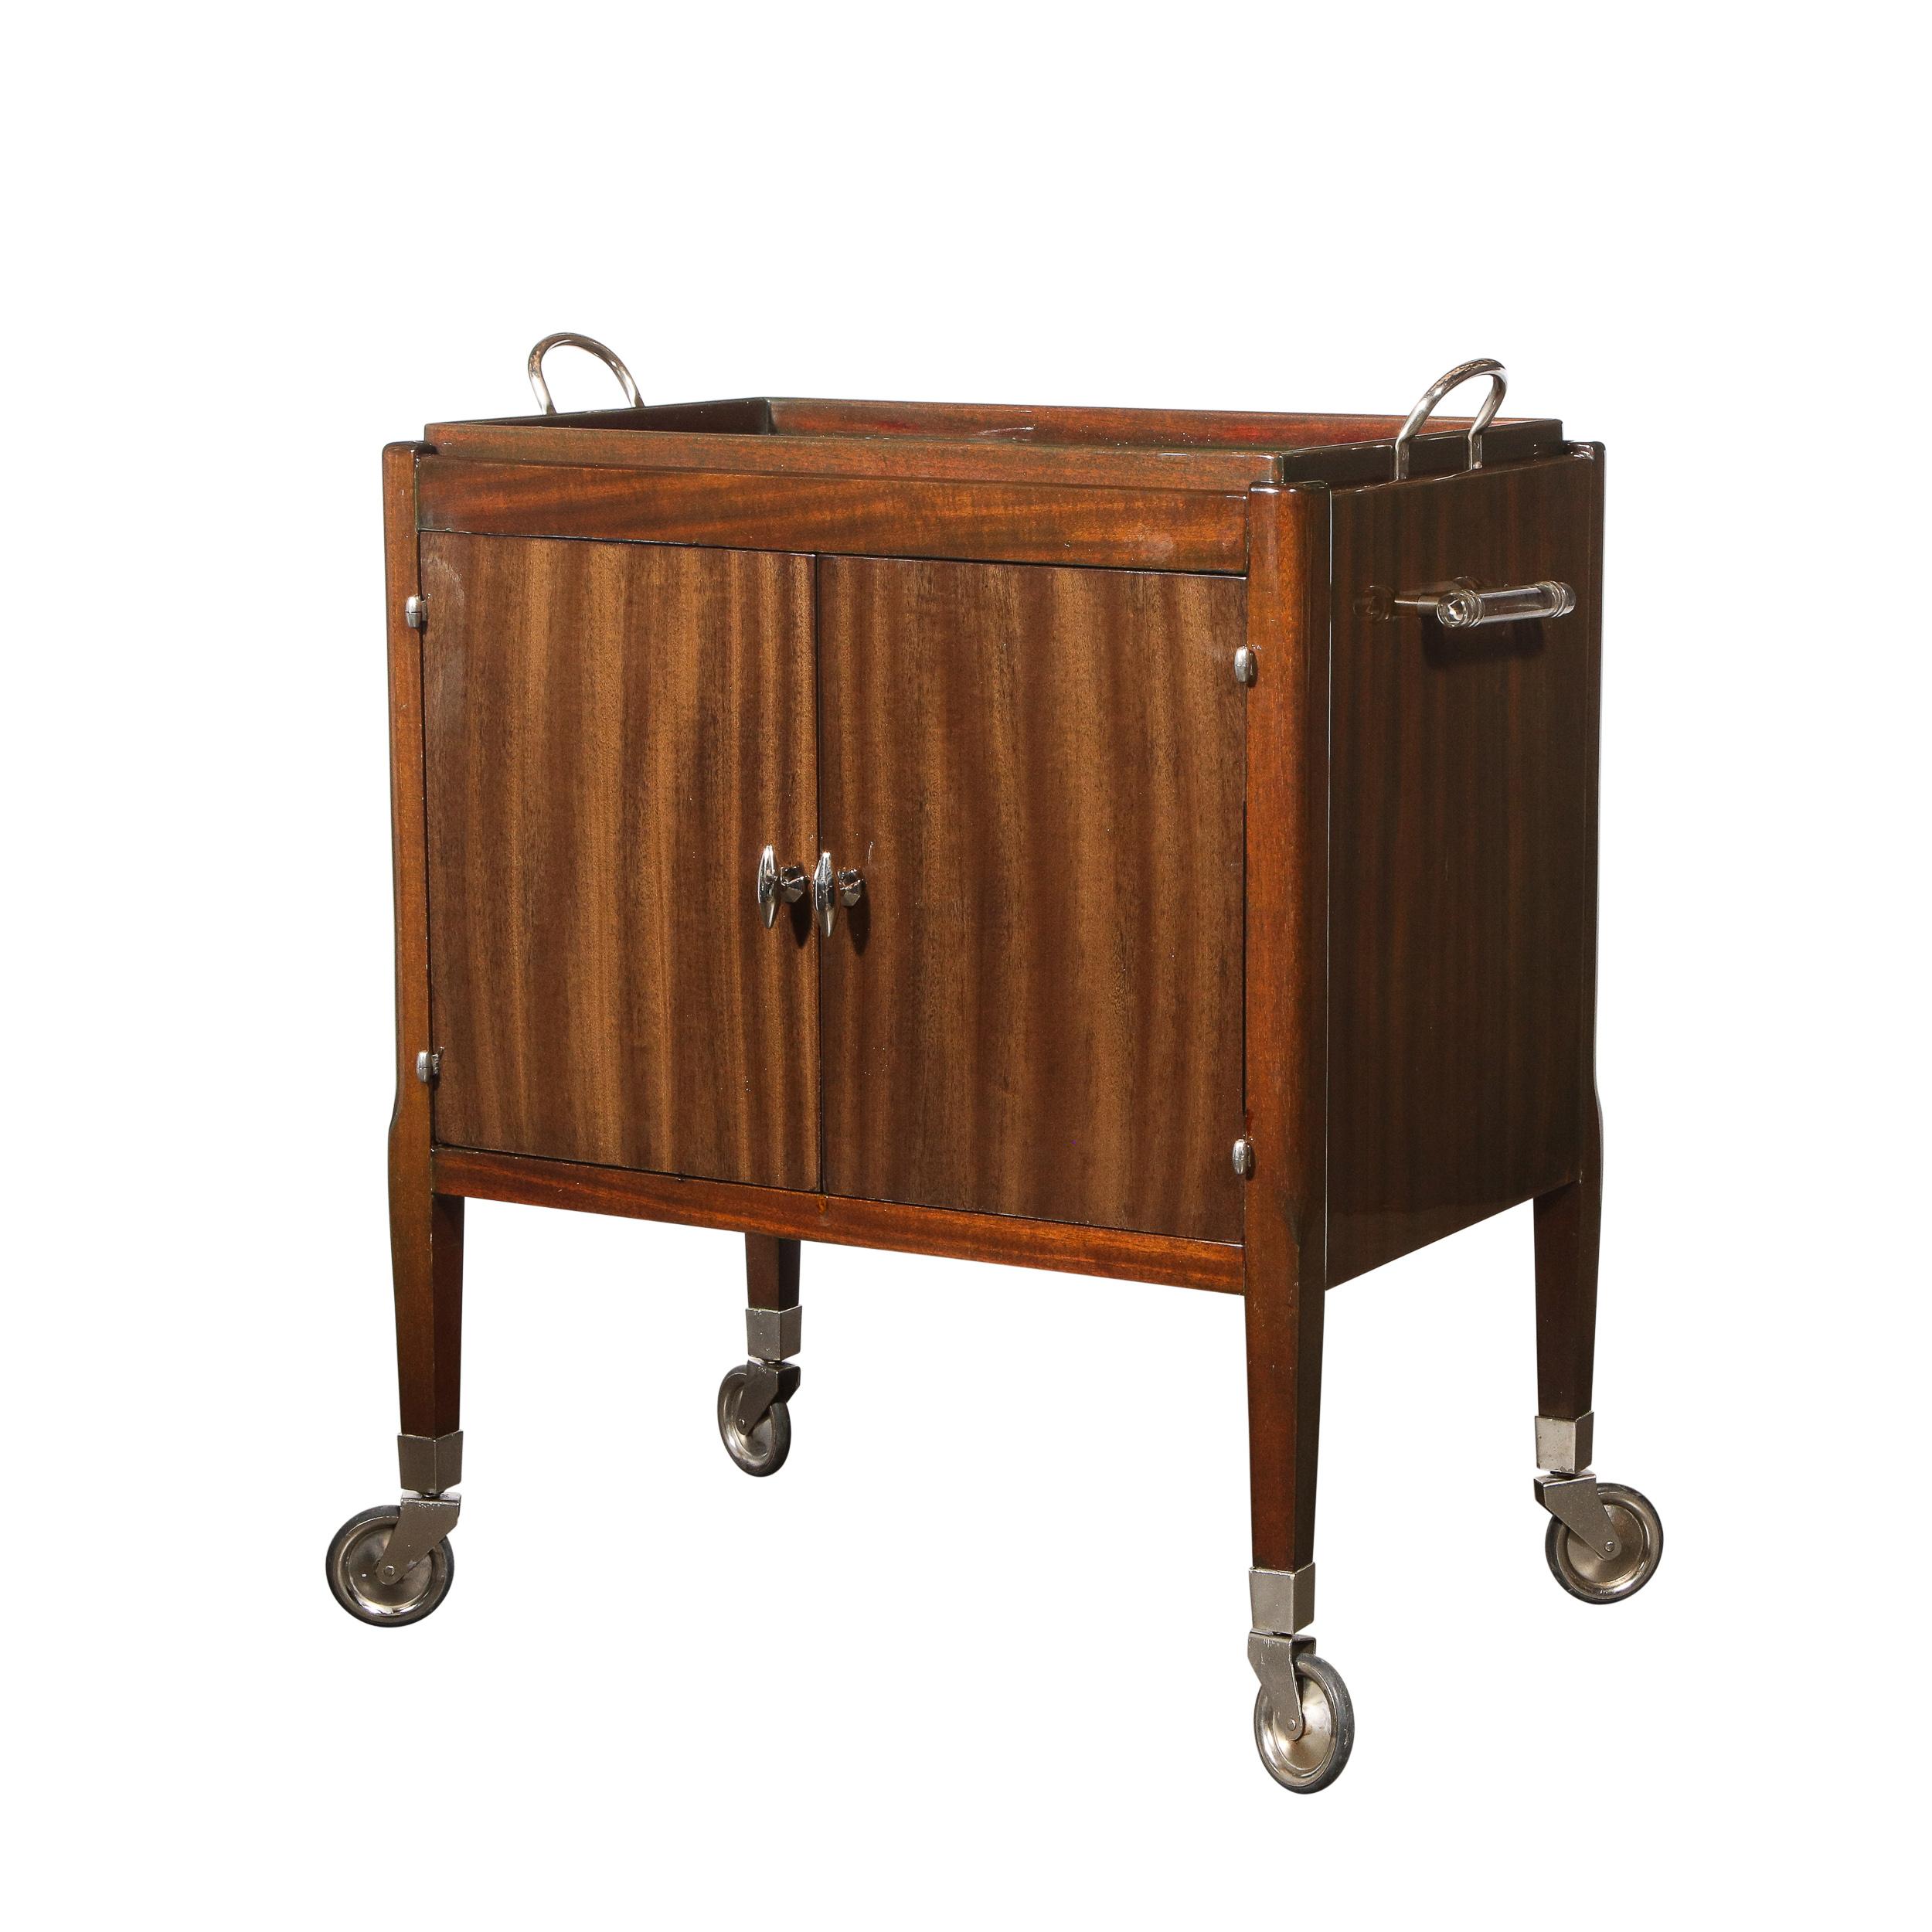 Mid-20th Century Art Deco Bookmatched Walnut Bar Cart with Nickeled Details & Removable Tray